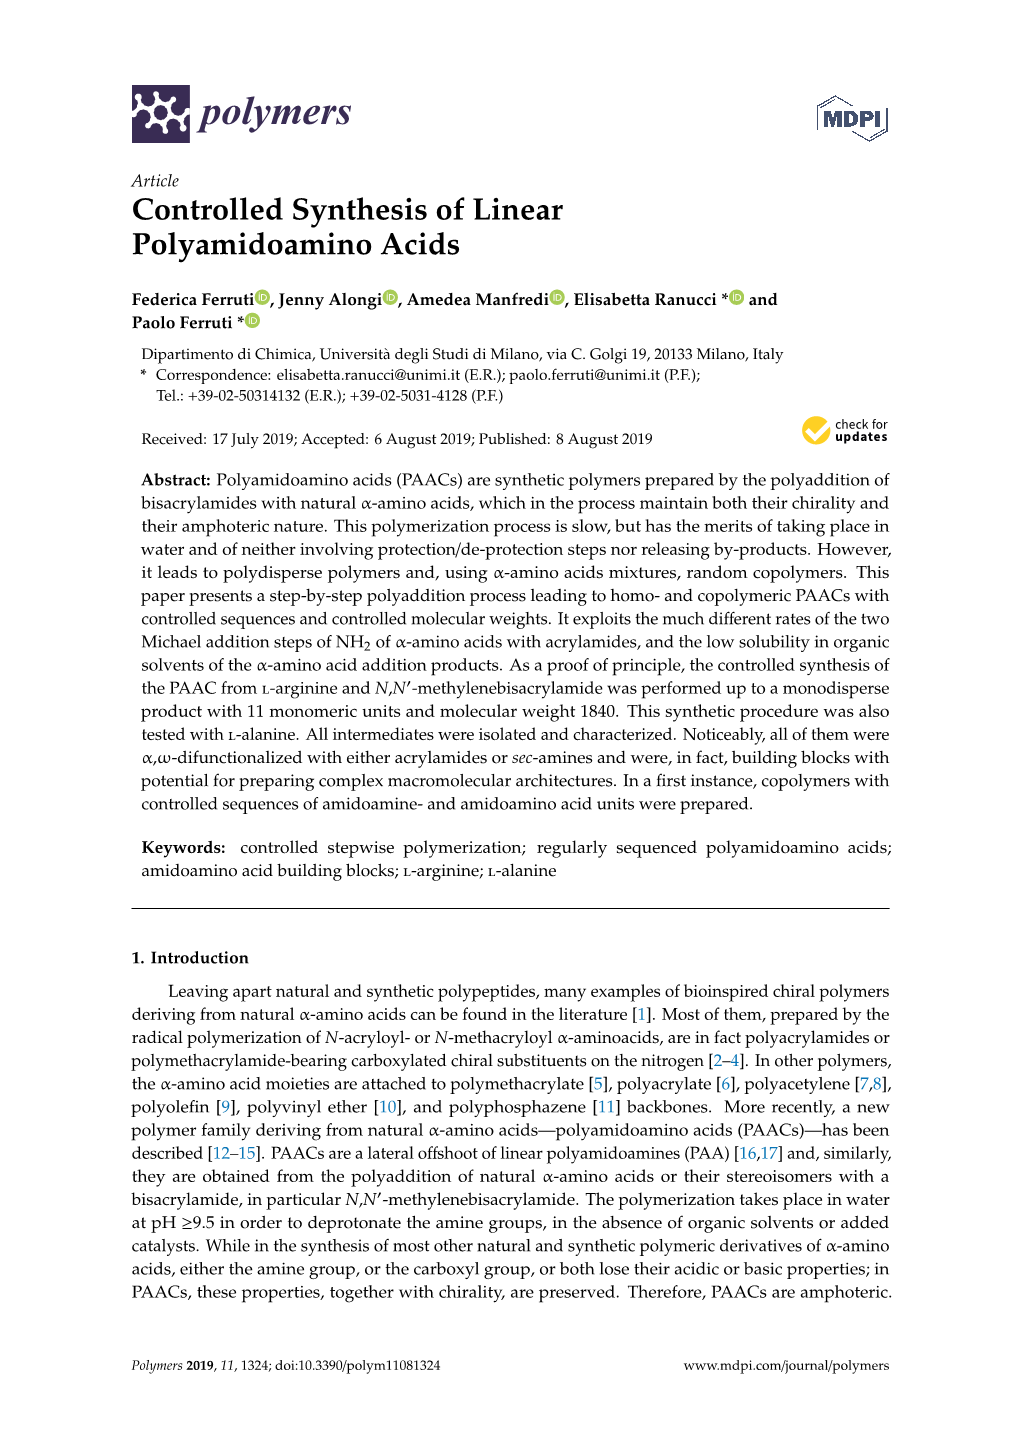 Controlled Synthesis of Linear Polyamidoamino Acids